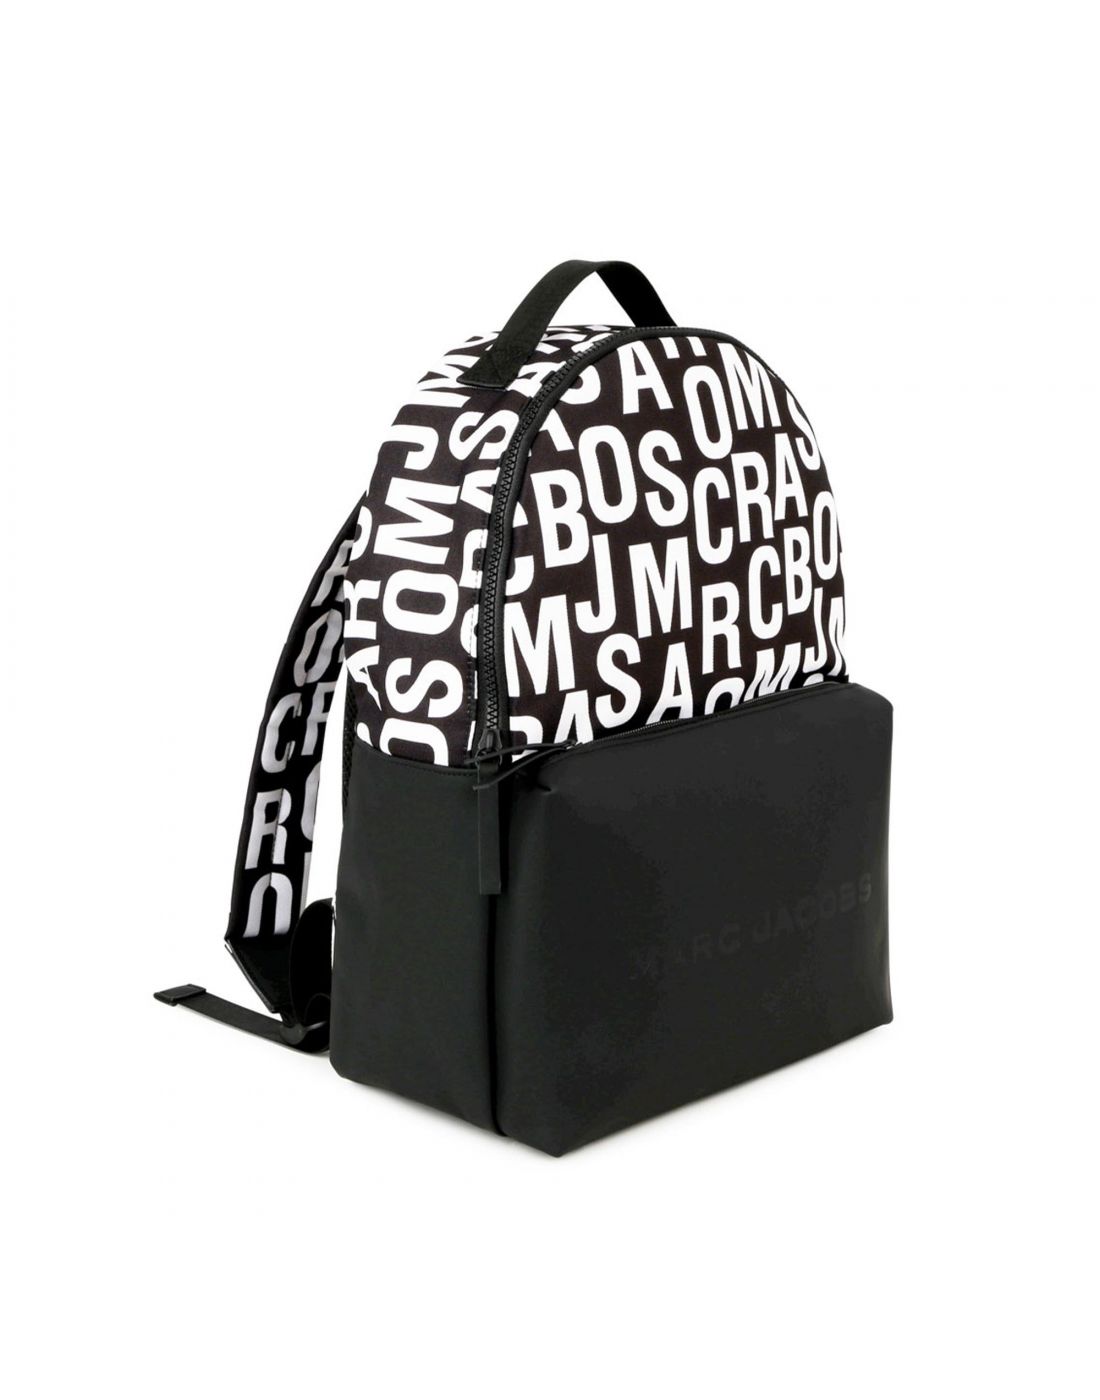 The Marc Jacobs Kids Backpack